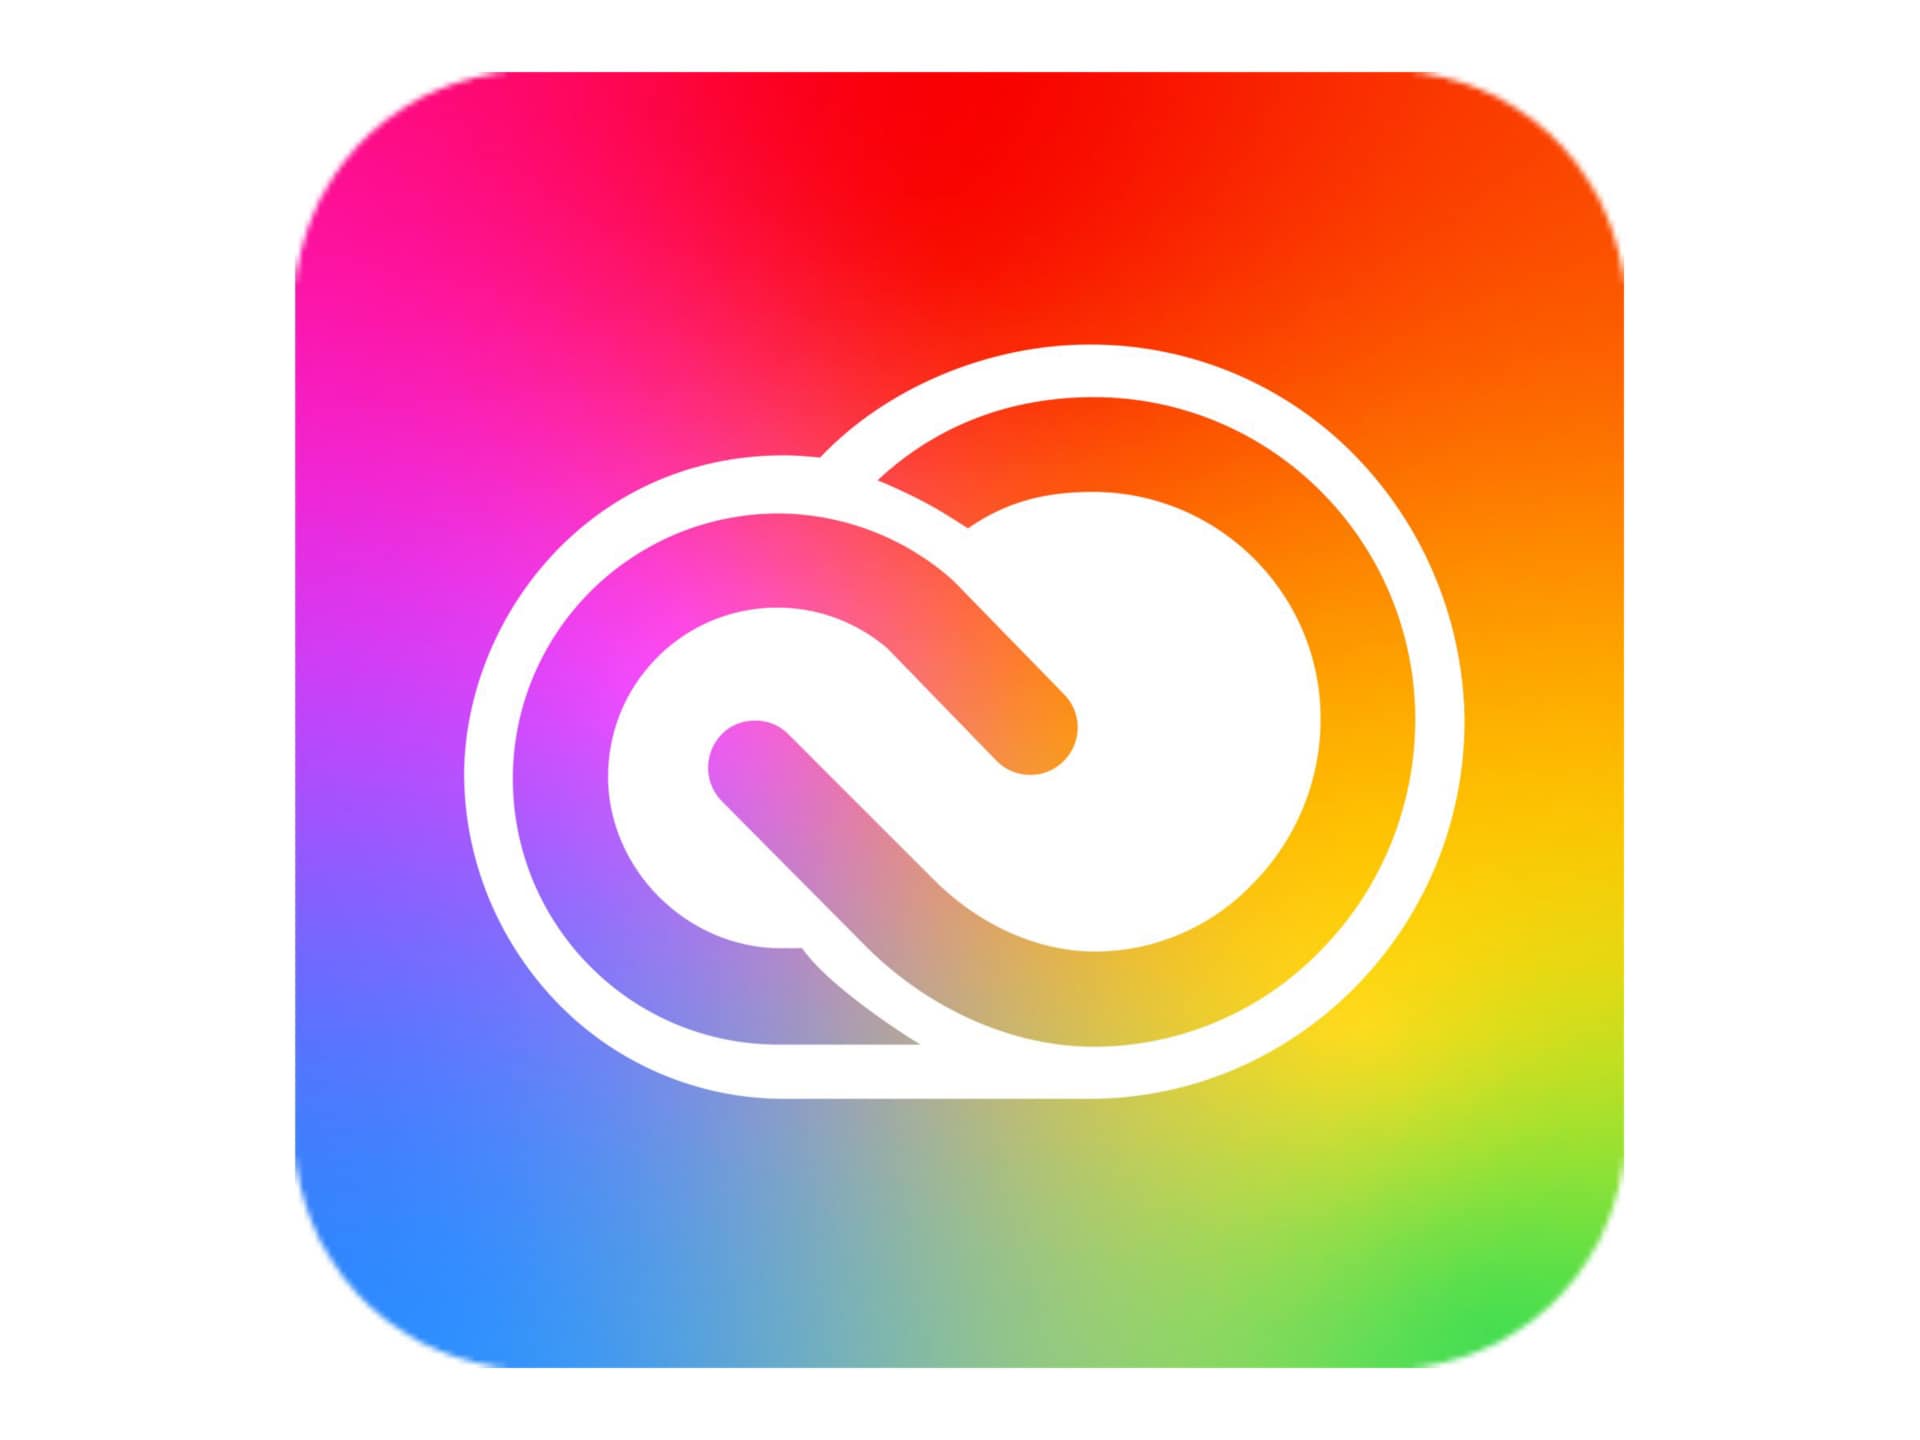 Adobe Creative Cloud for teams - Subscription New (2 months) - 10 assets, 1 named user - with Adobe Stock